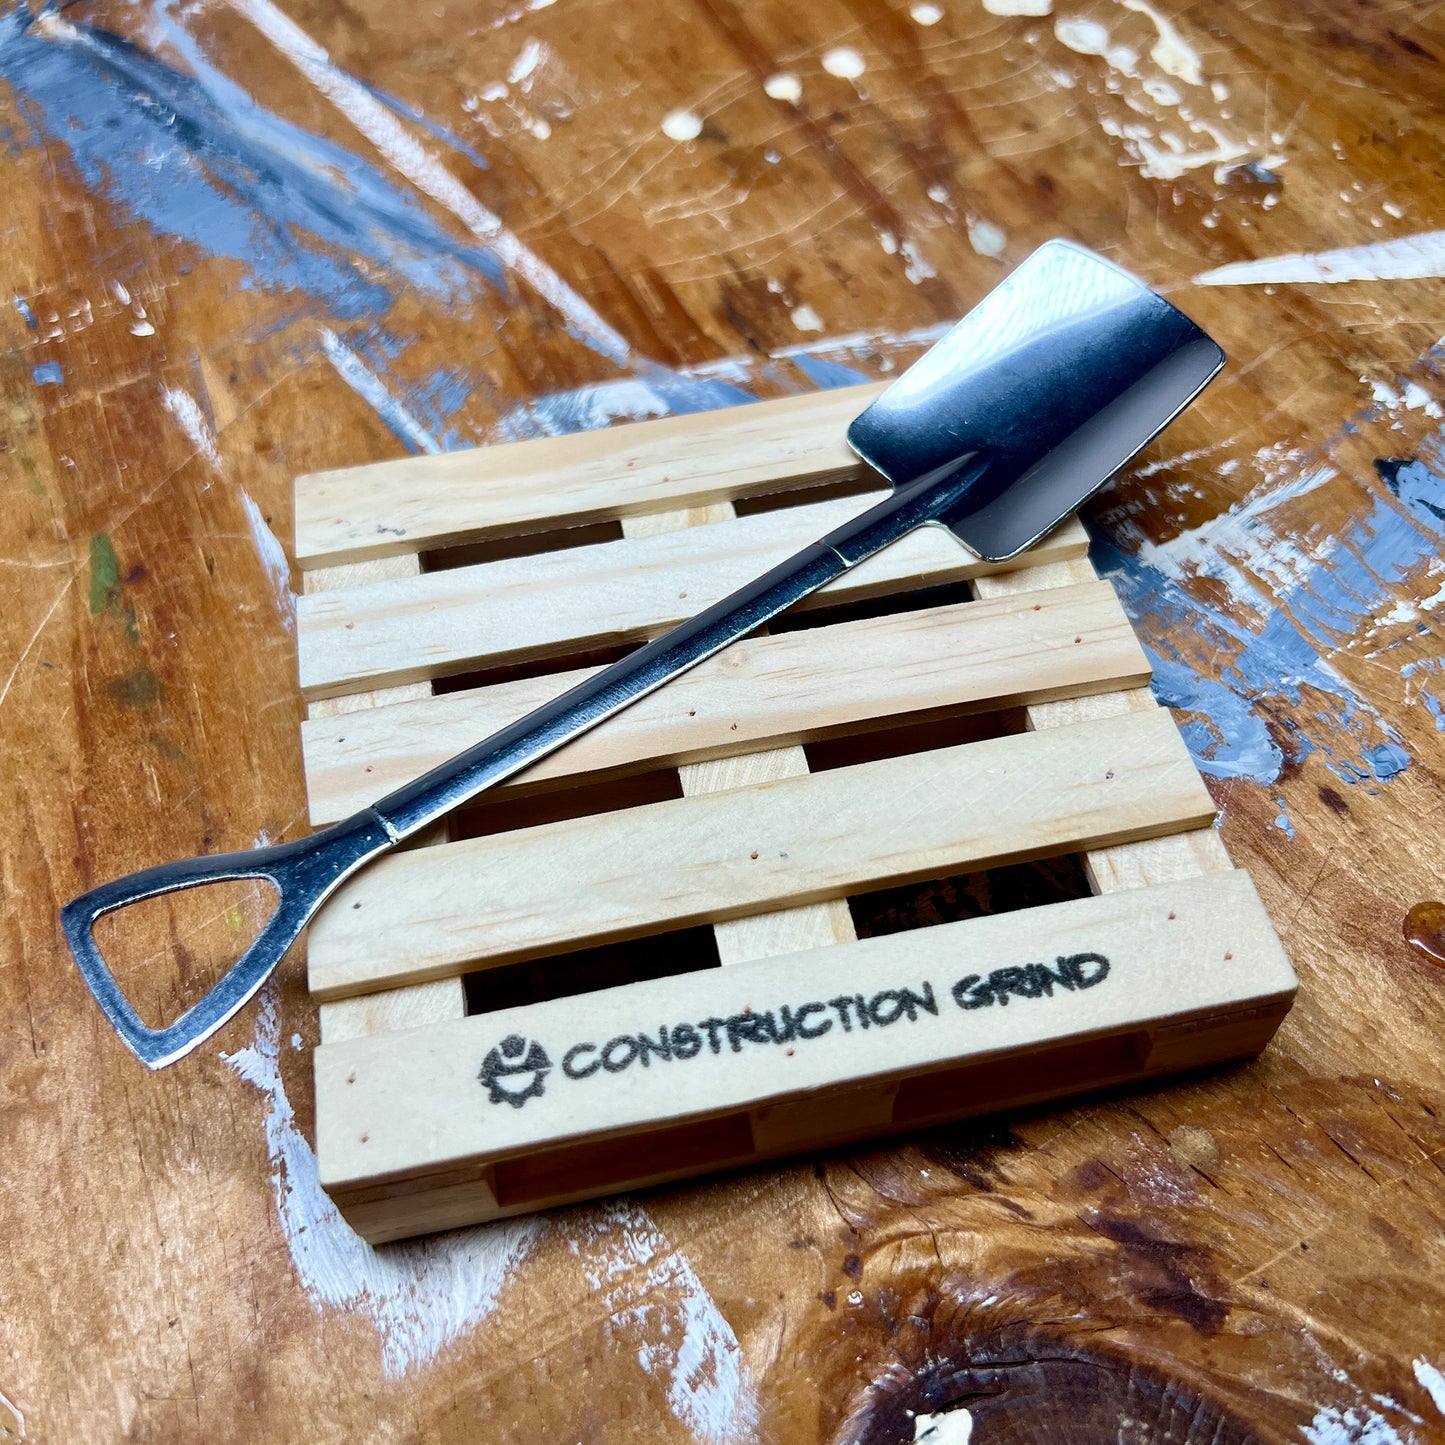  A closeup of Construction Grind's 4" square pallet coaster with a hand stamped Construction Grind logo, and stainless-steel shovel spoon laying on the pallet.